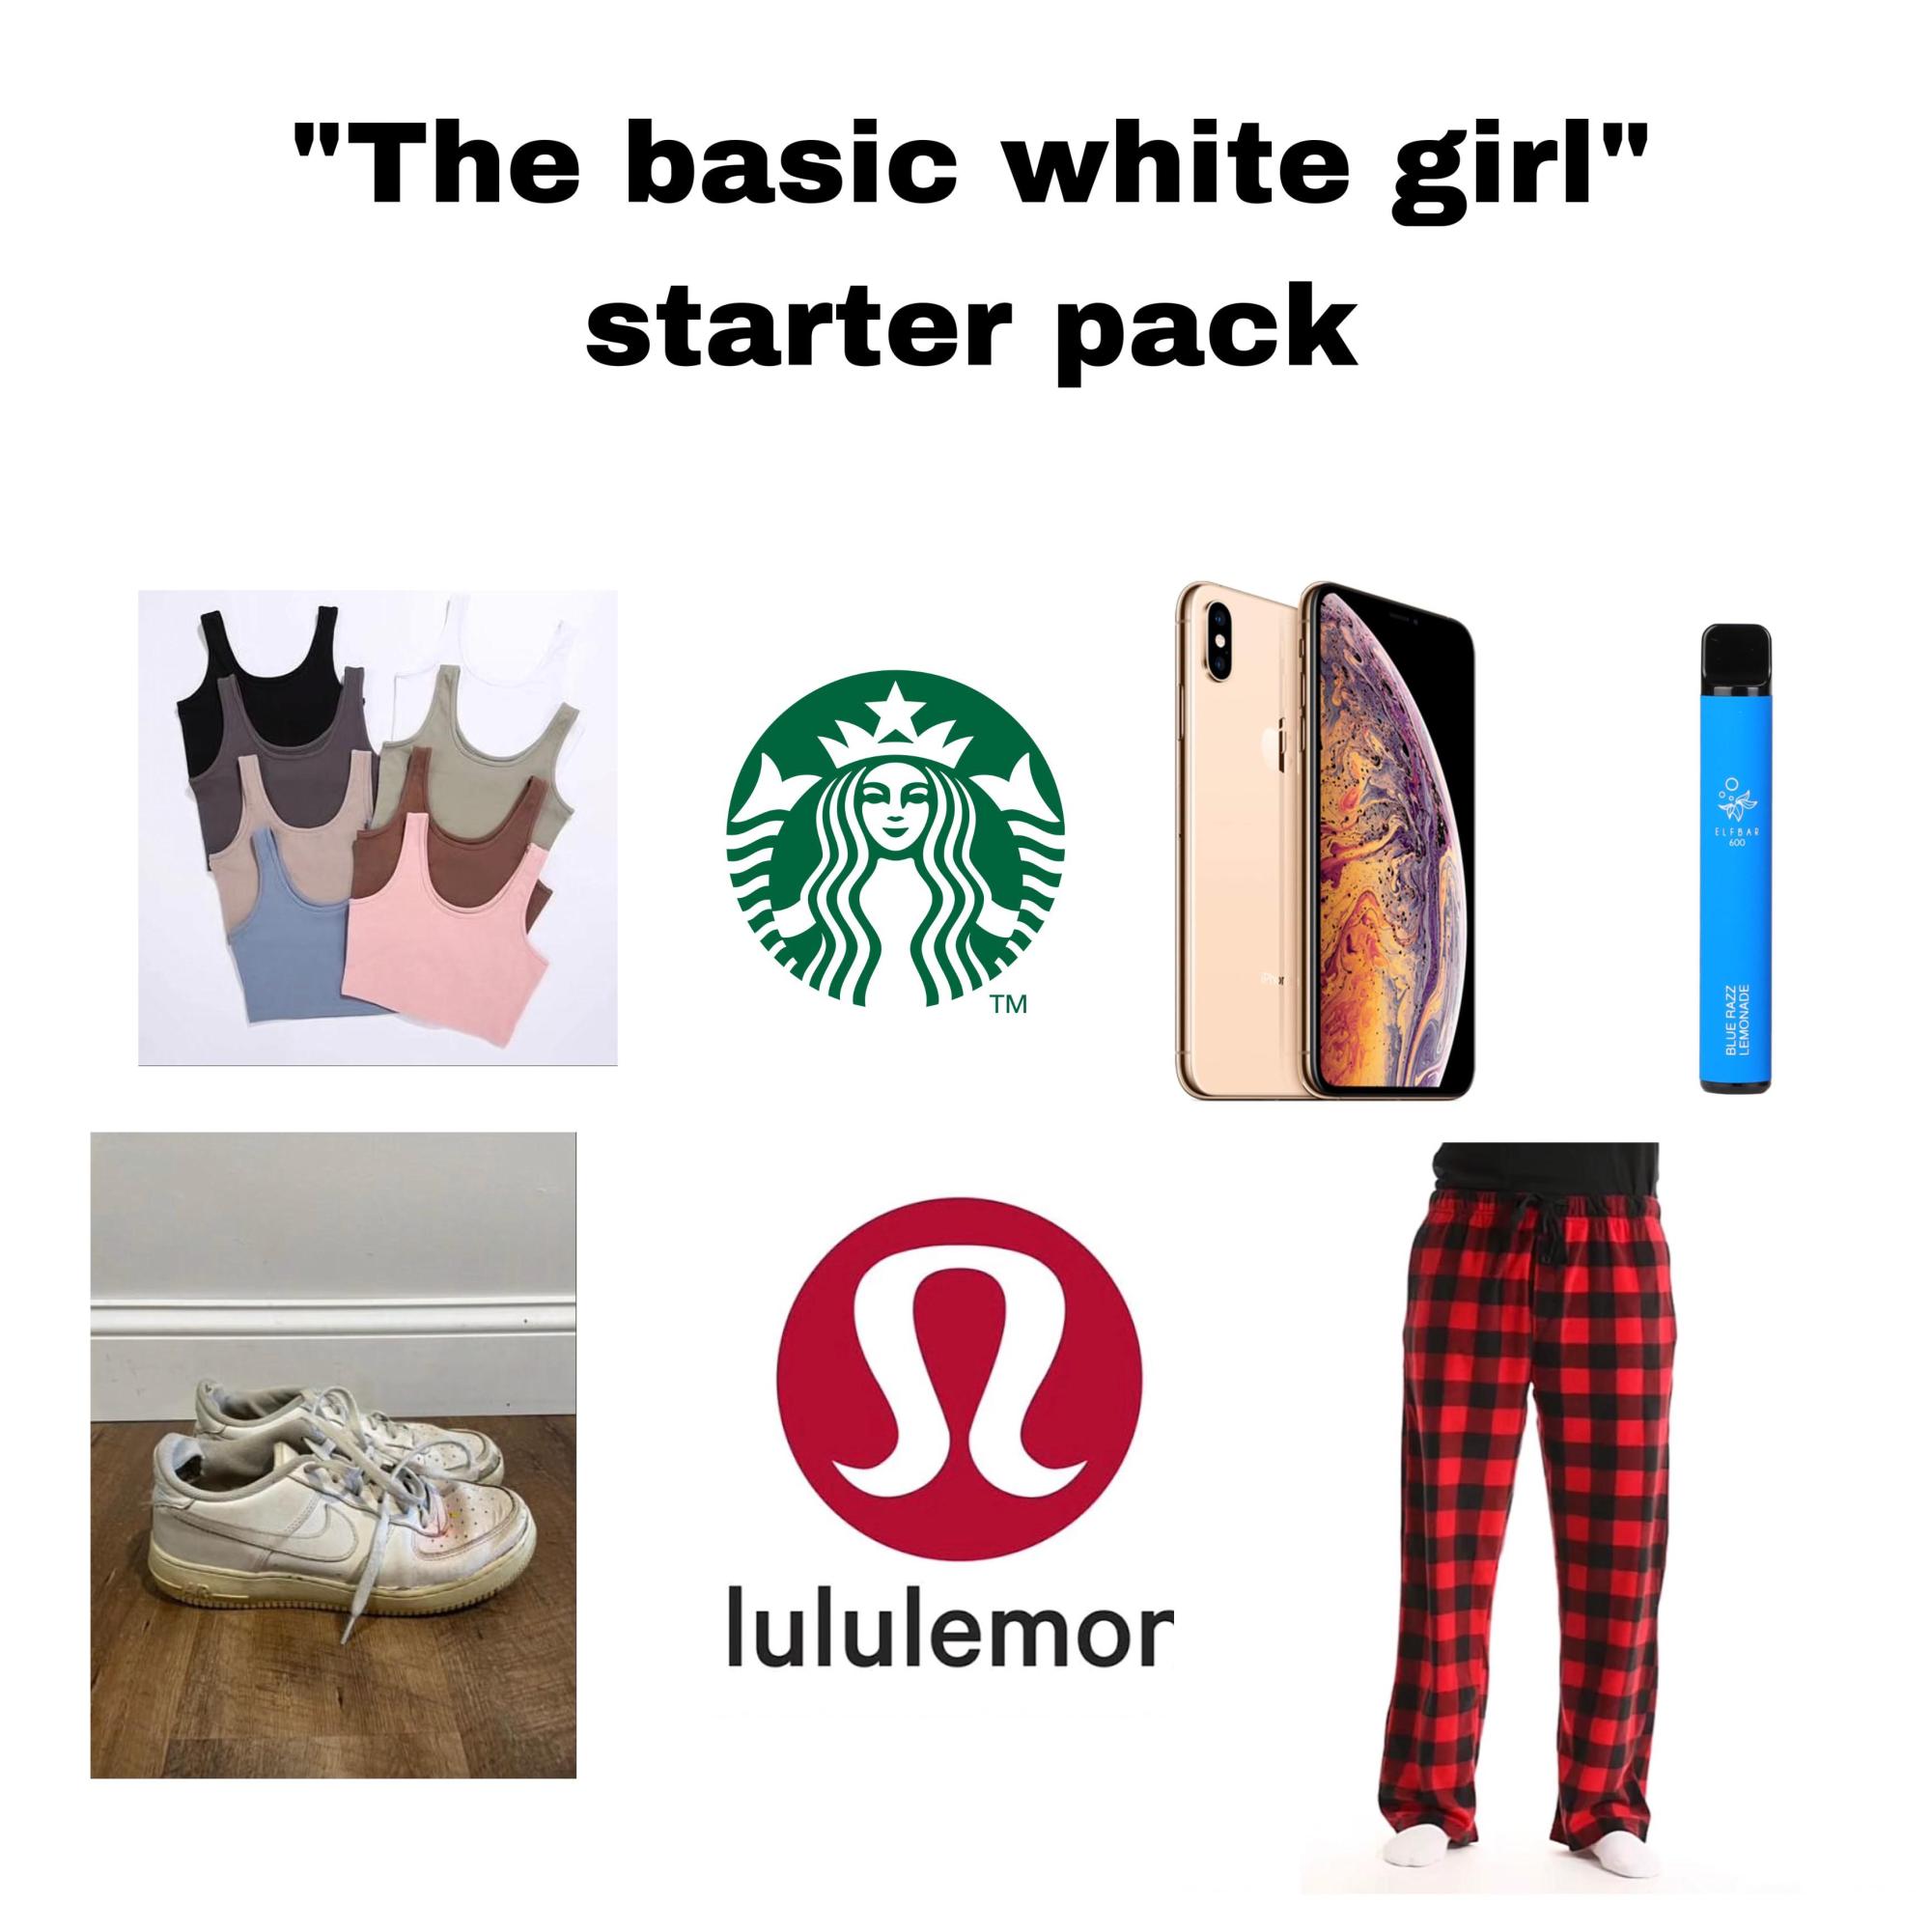 A collection of items all deemed basic